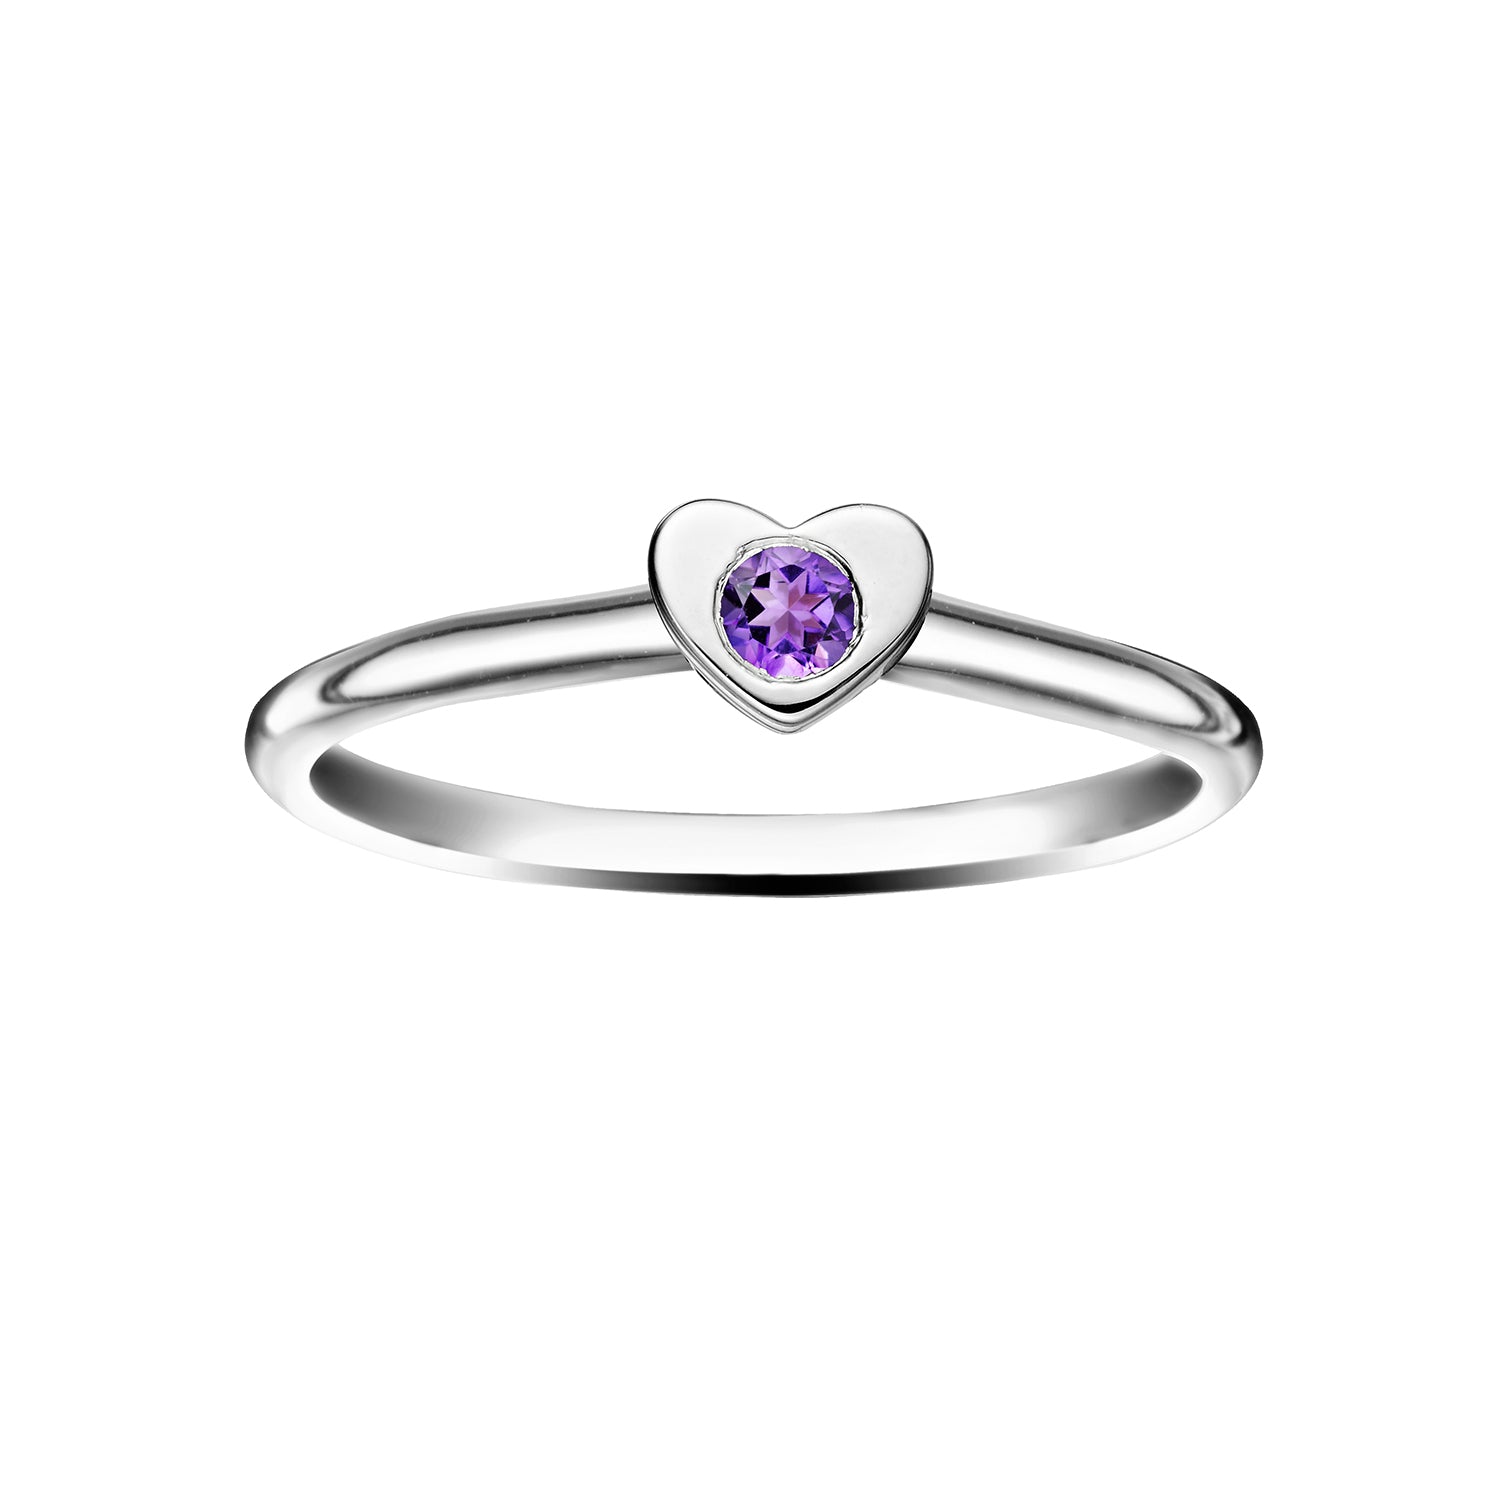 Polished Silver Heart Stacking Birthstone Rings - February / Amethyst